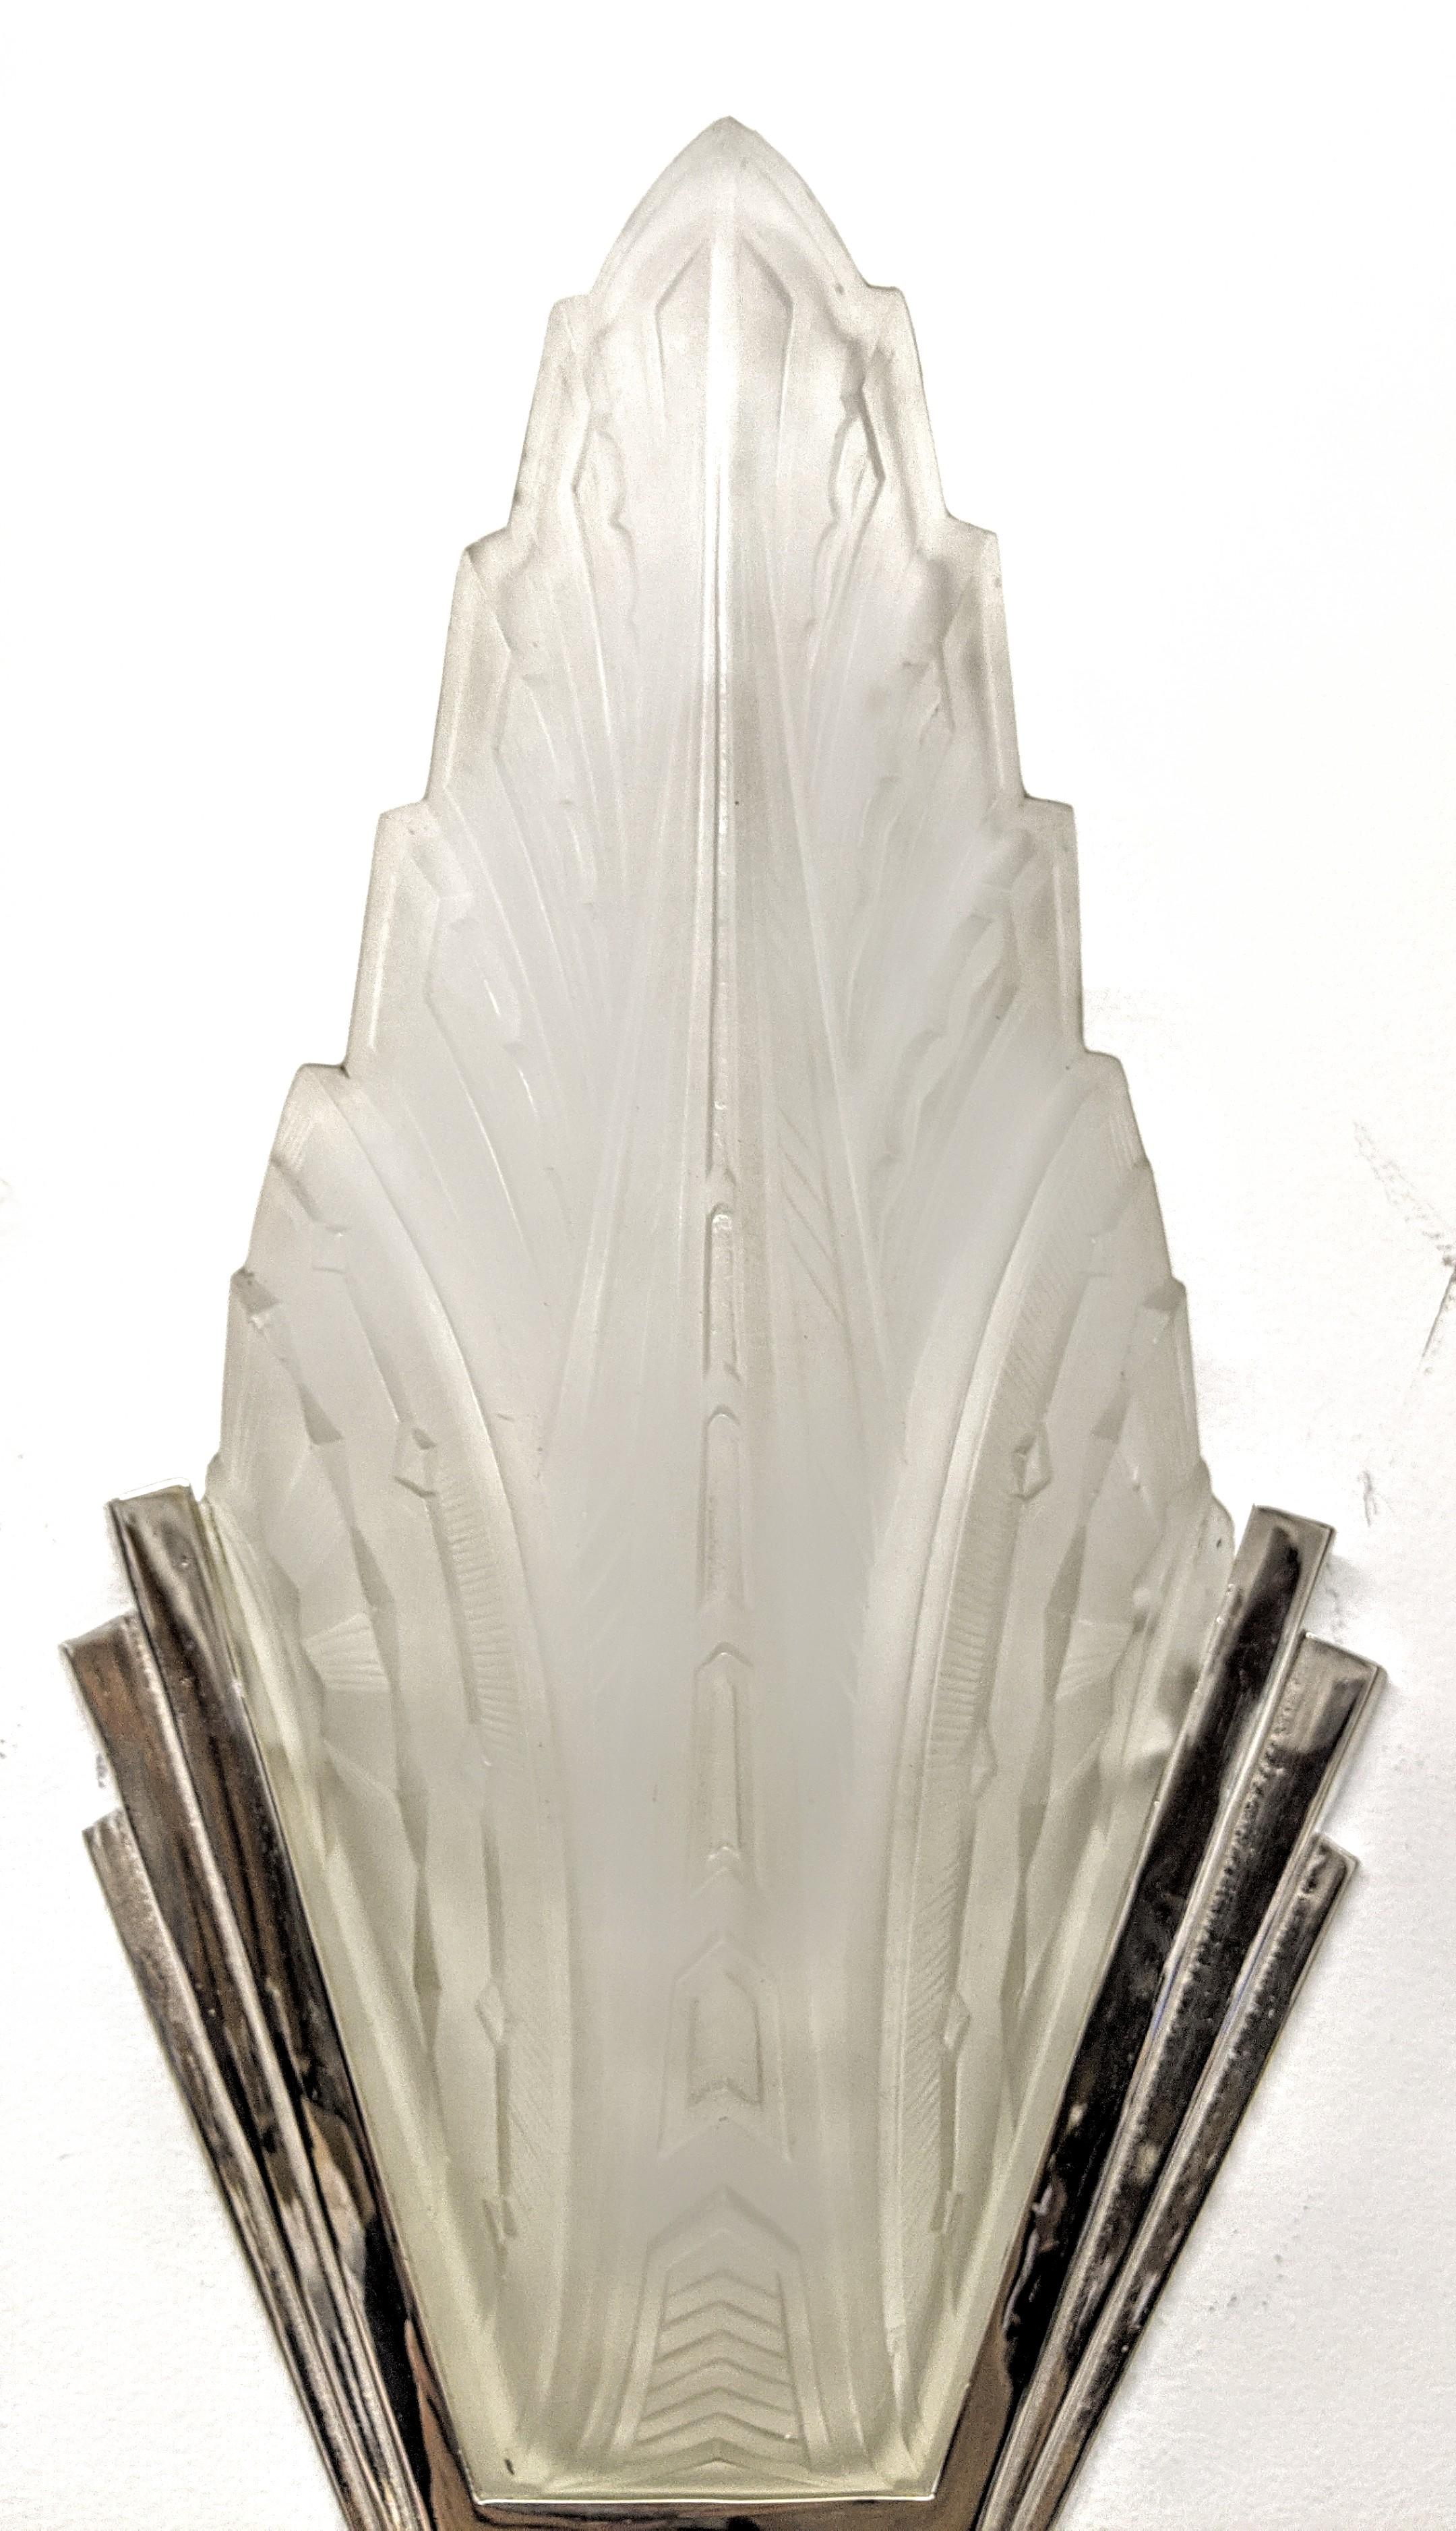 20th Century Pair of French Art Deco Wall Sconces Signed by Hanots (two pair available) For Sale